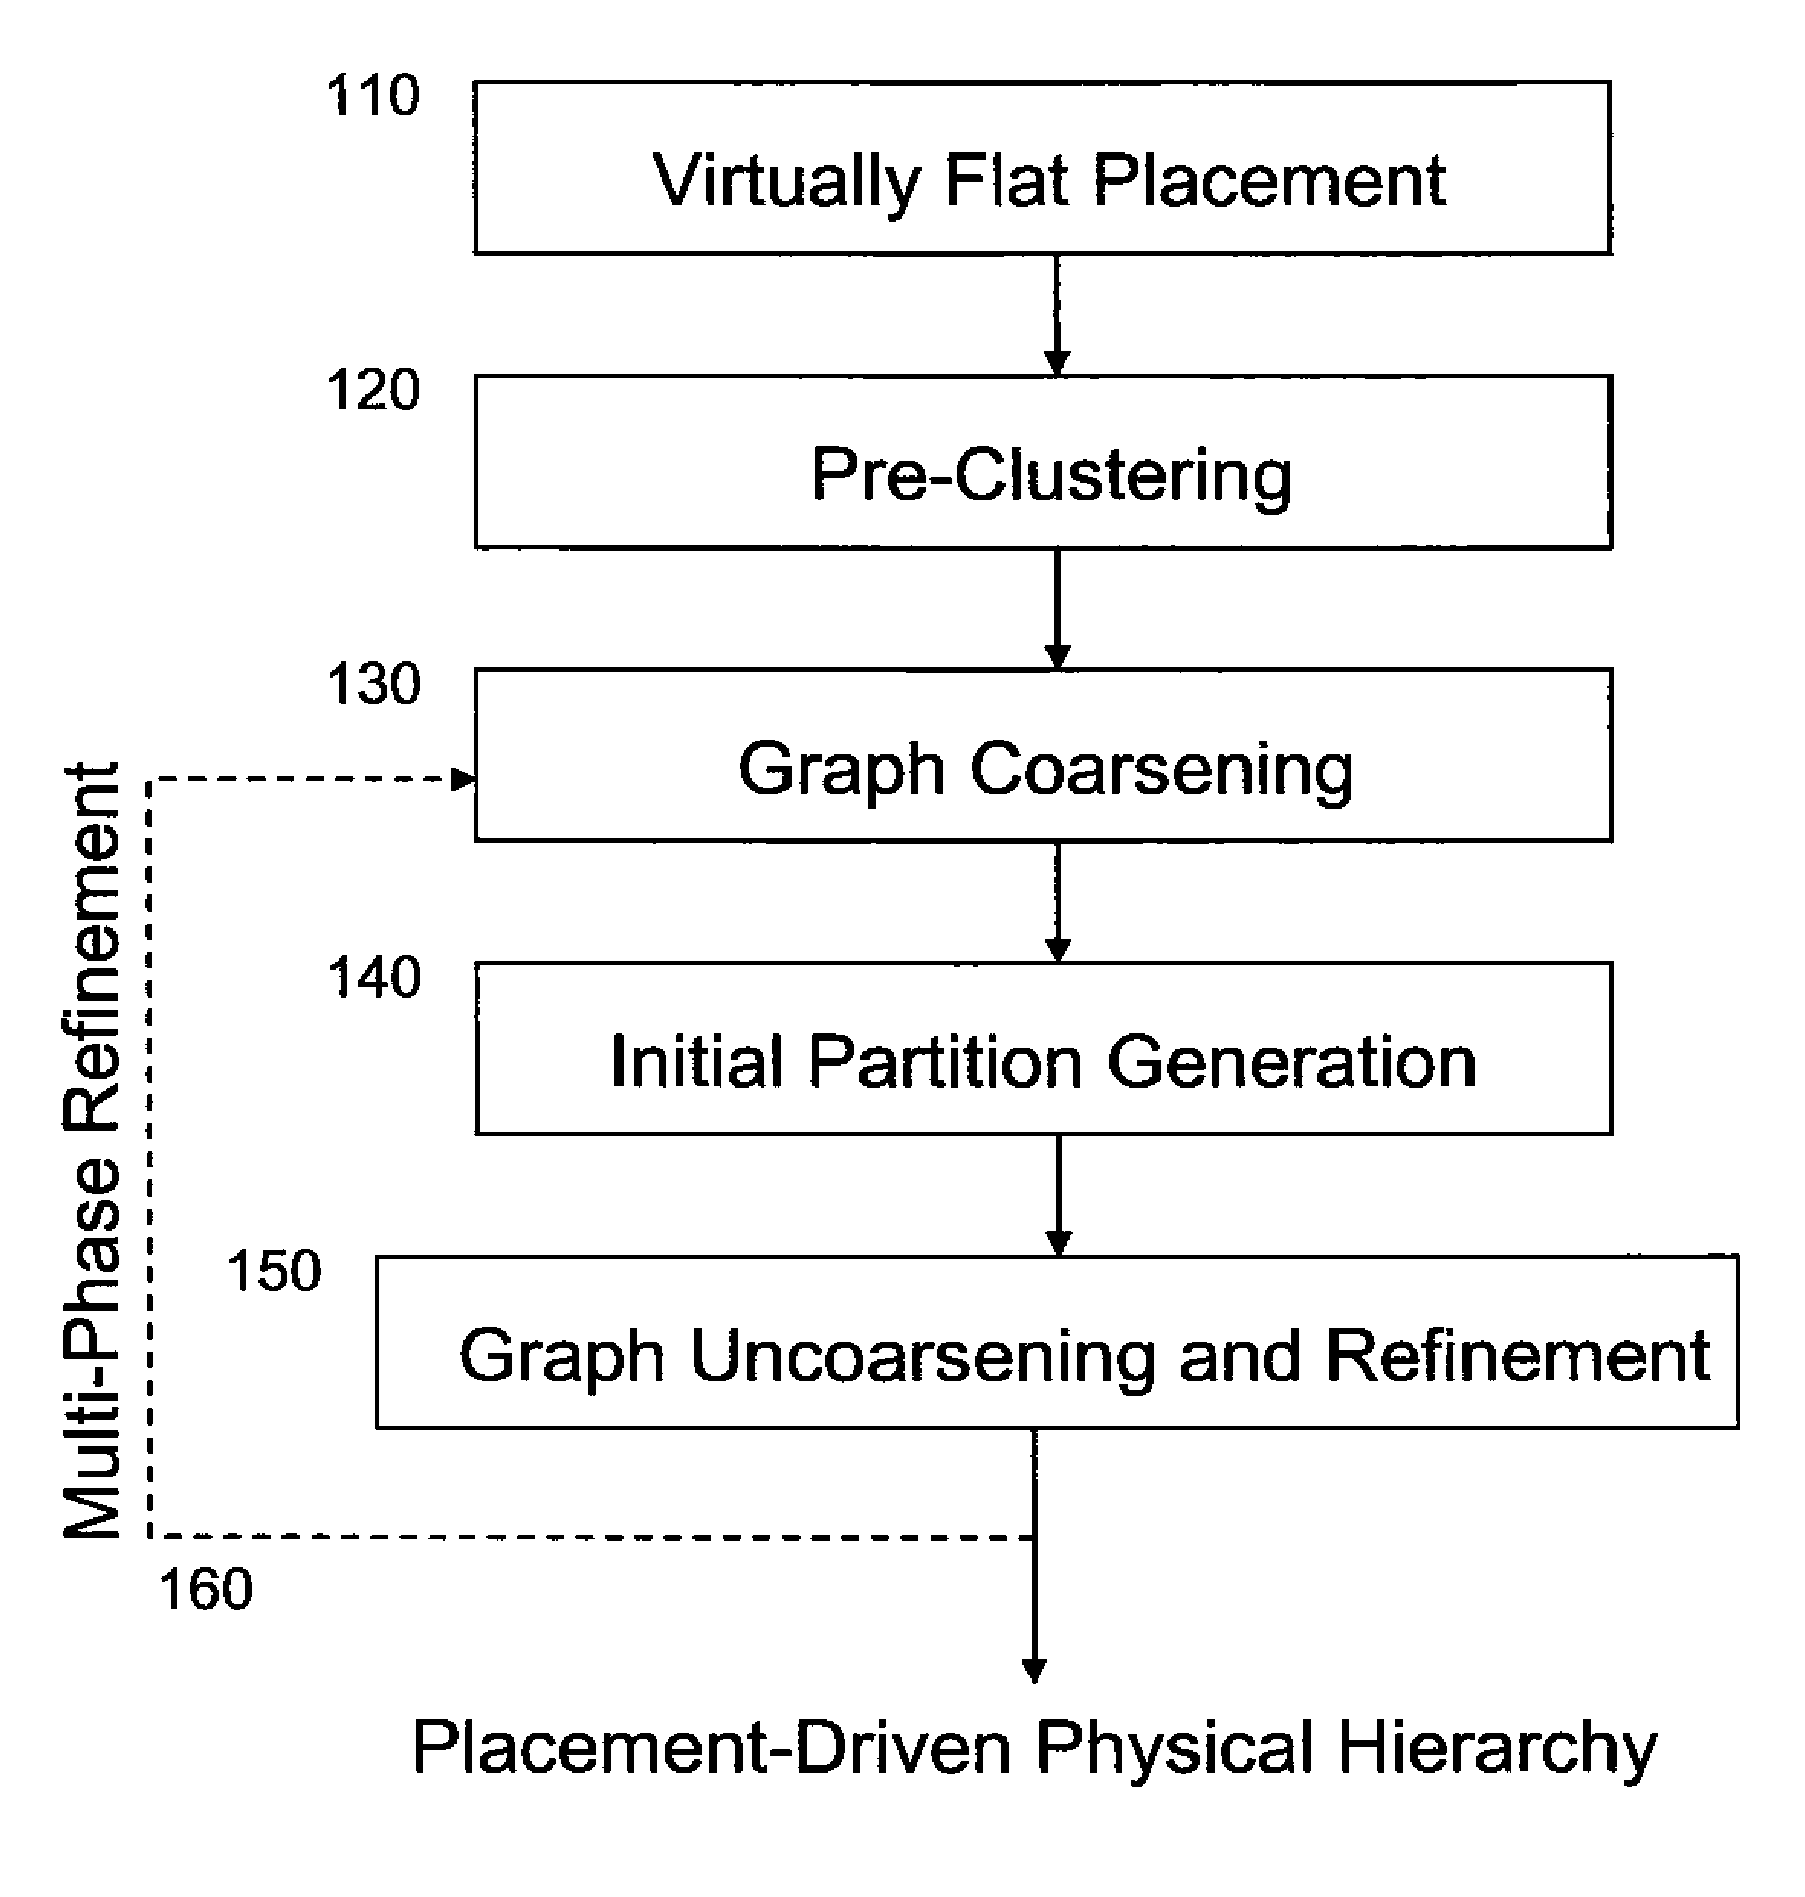 Placement-Driven Physical-Hierarchy Generation